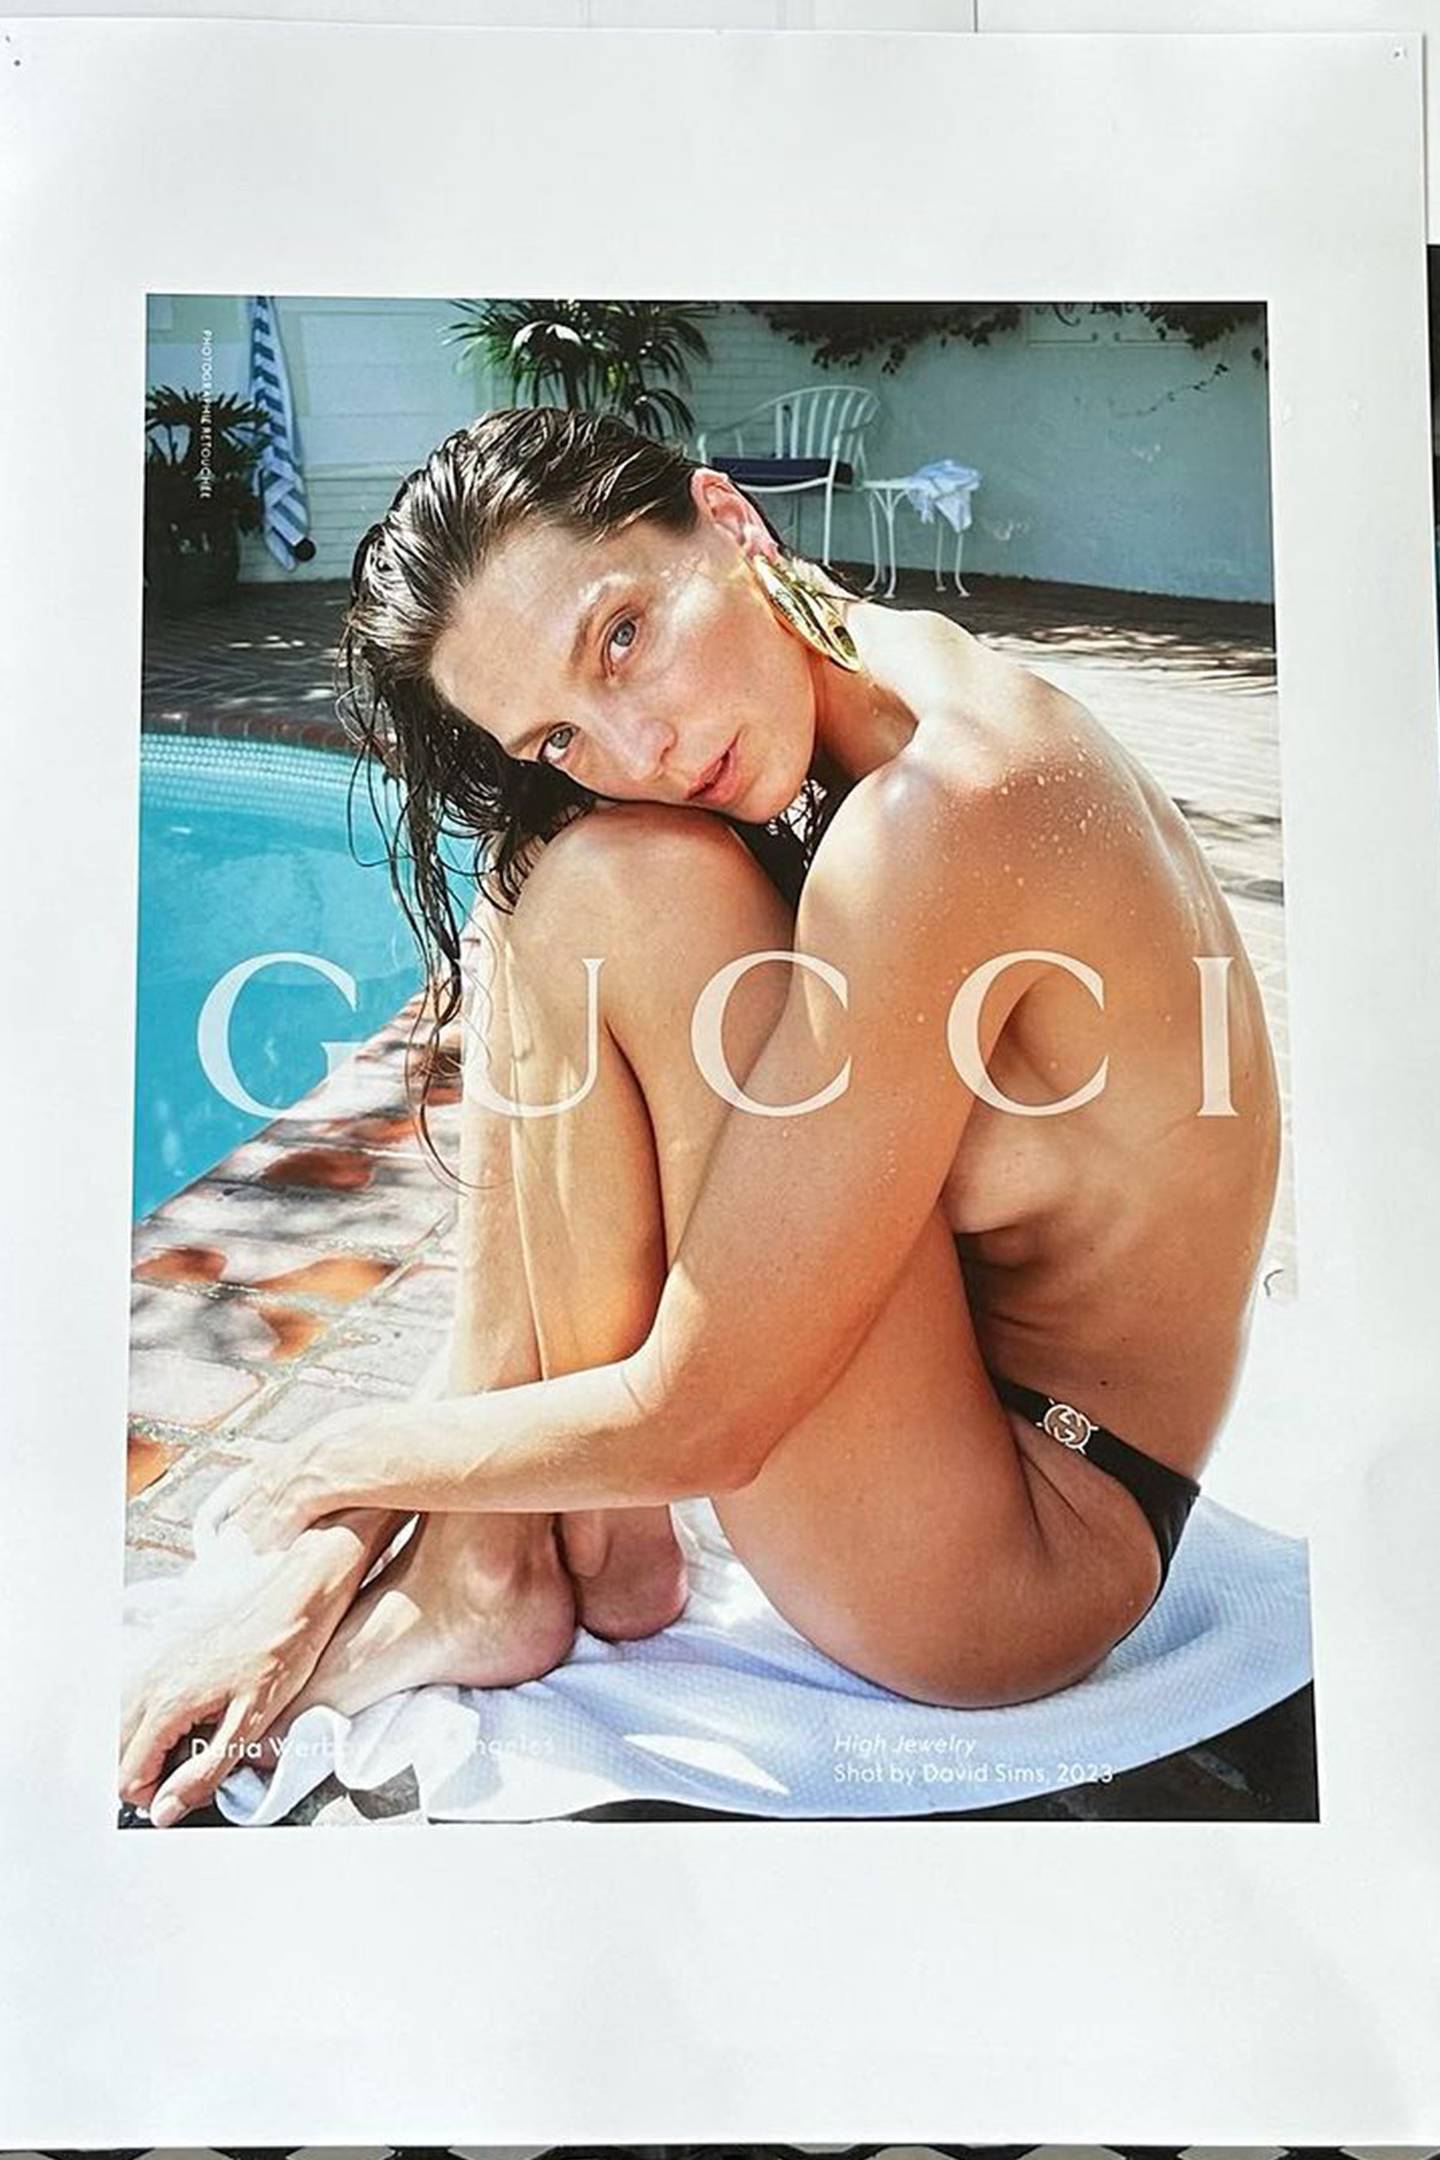 On Saturday, new Gucci creative director Sabato De Sarno offered a glimpse of his vision for the stalled Italian megabrand, posting an image from a high jewellery campaign starring model Daria Werbowy to his personal Instagram account.